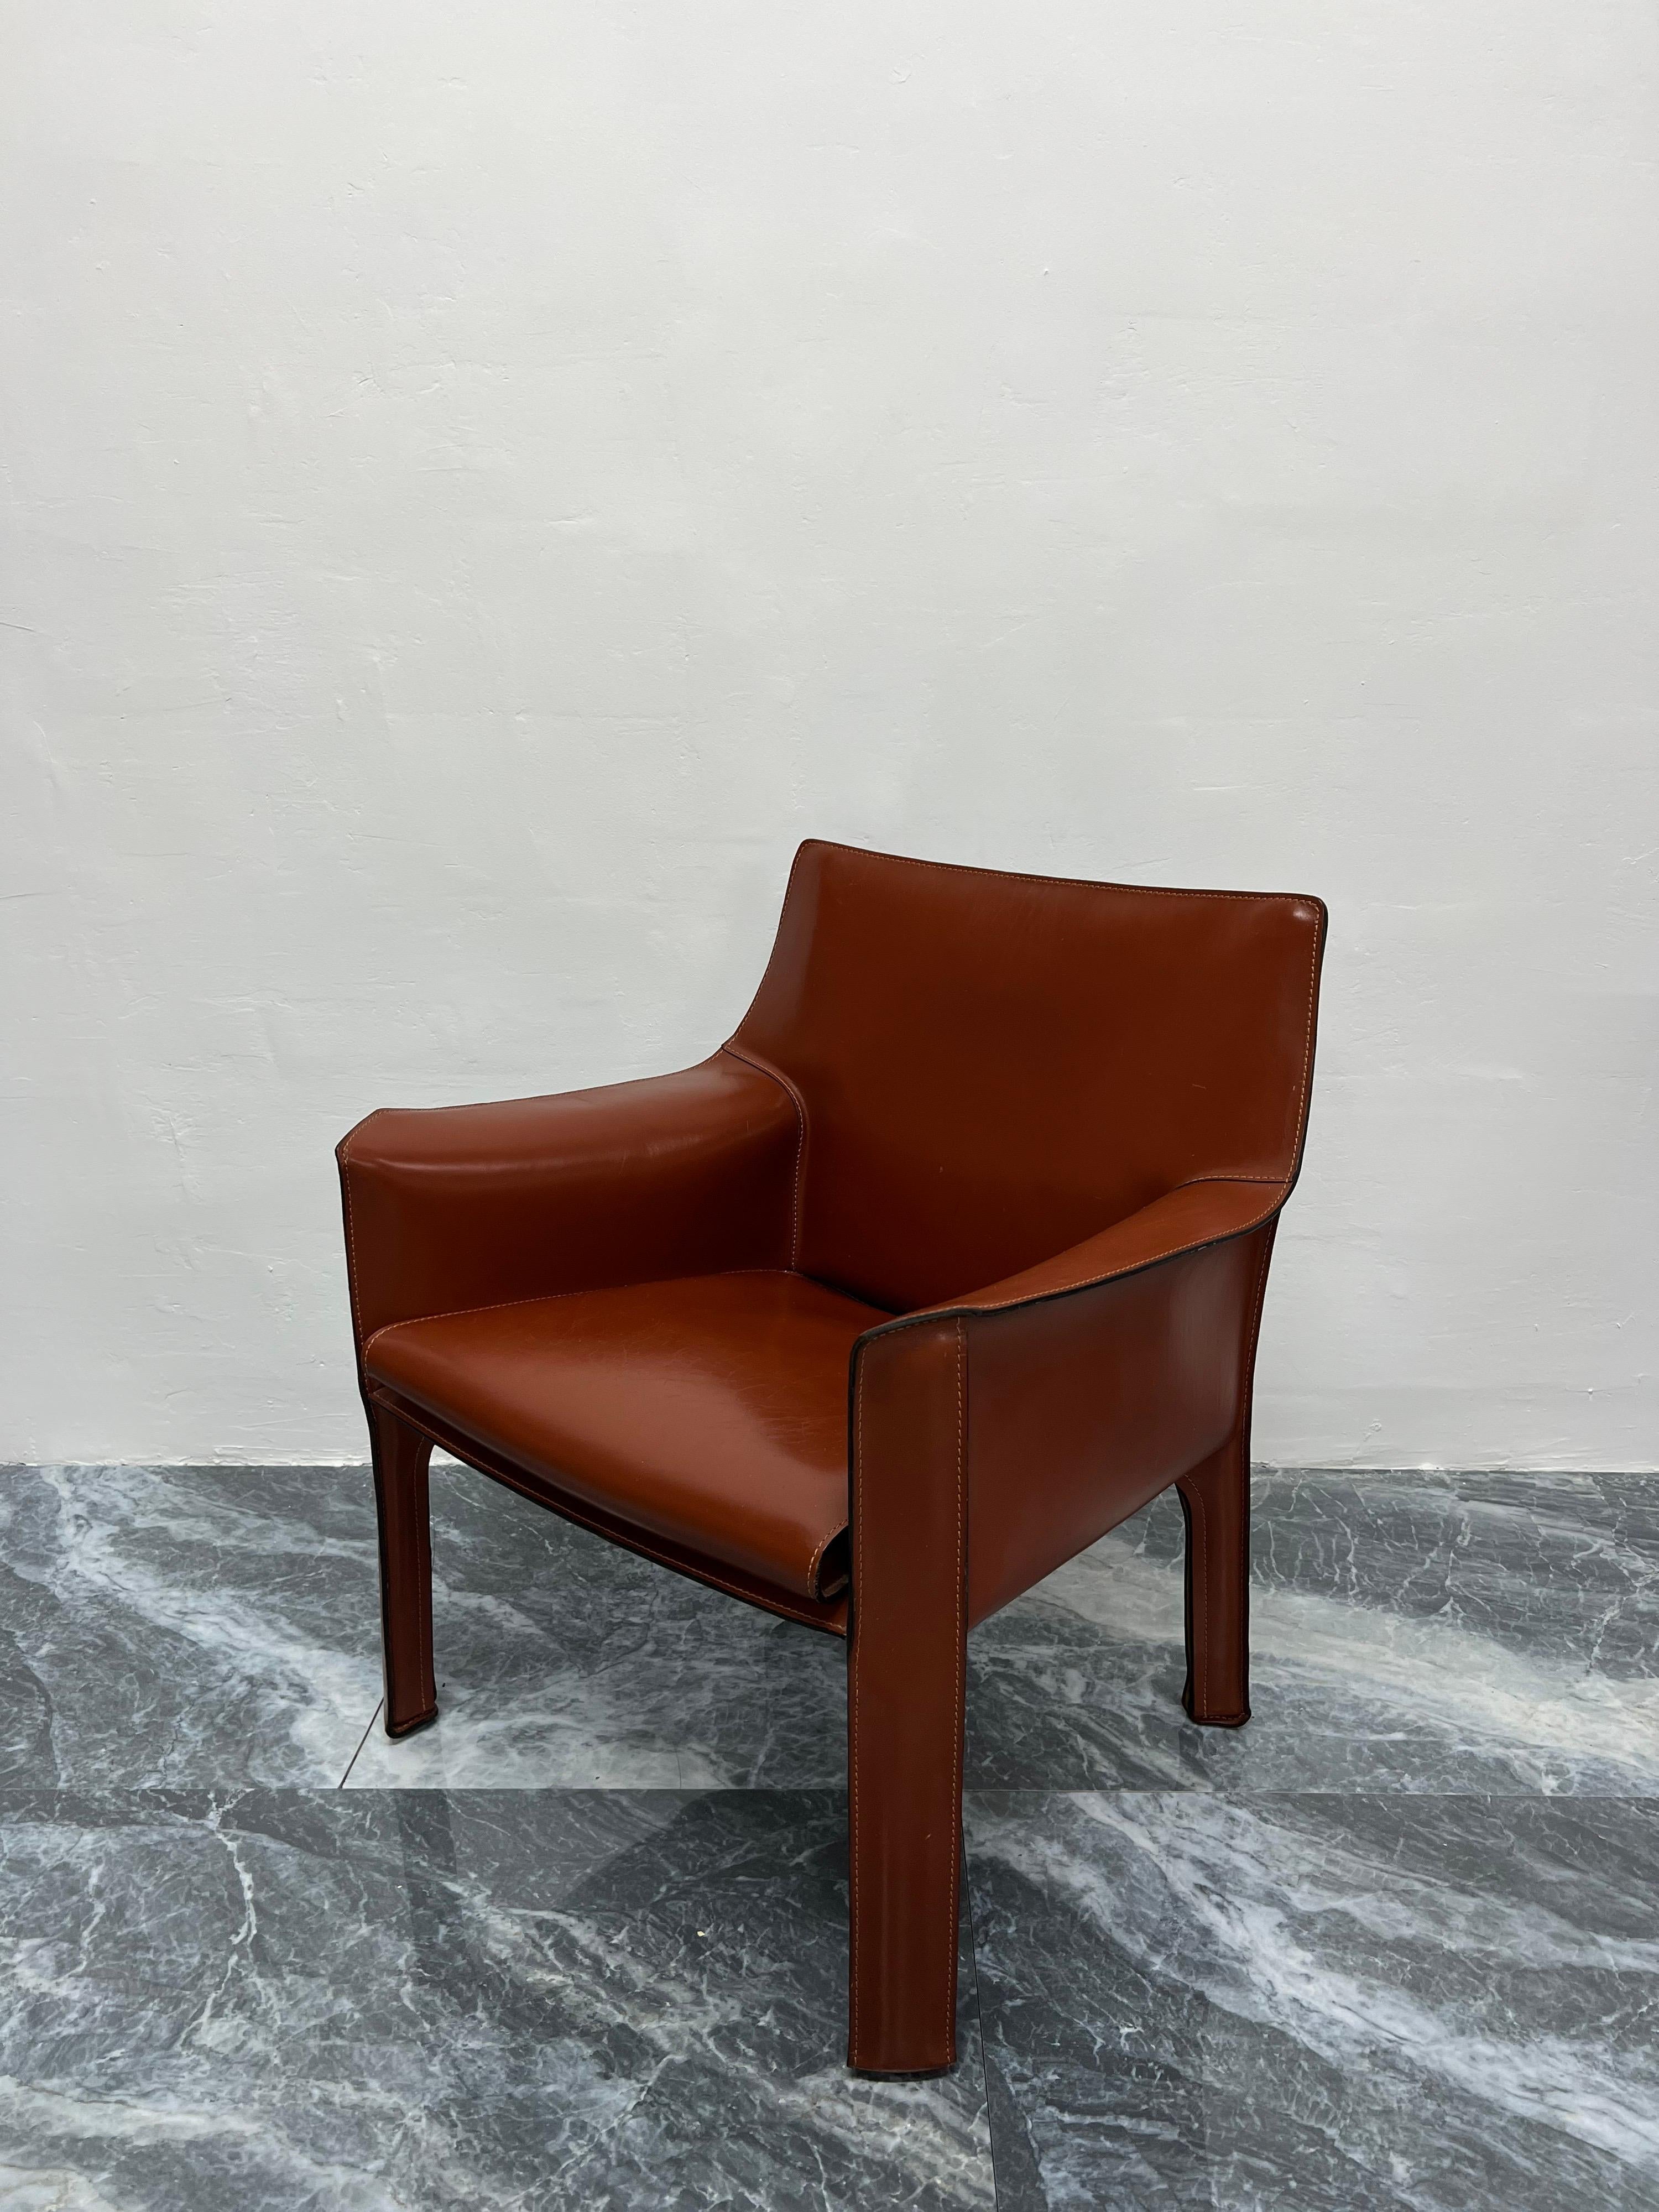 Mario Bellini Cab Leather Lounge Chairs for Cassina, a Pair 1